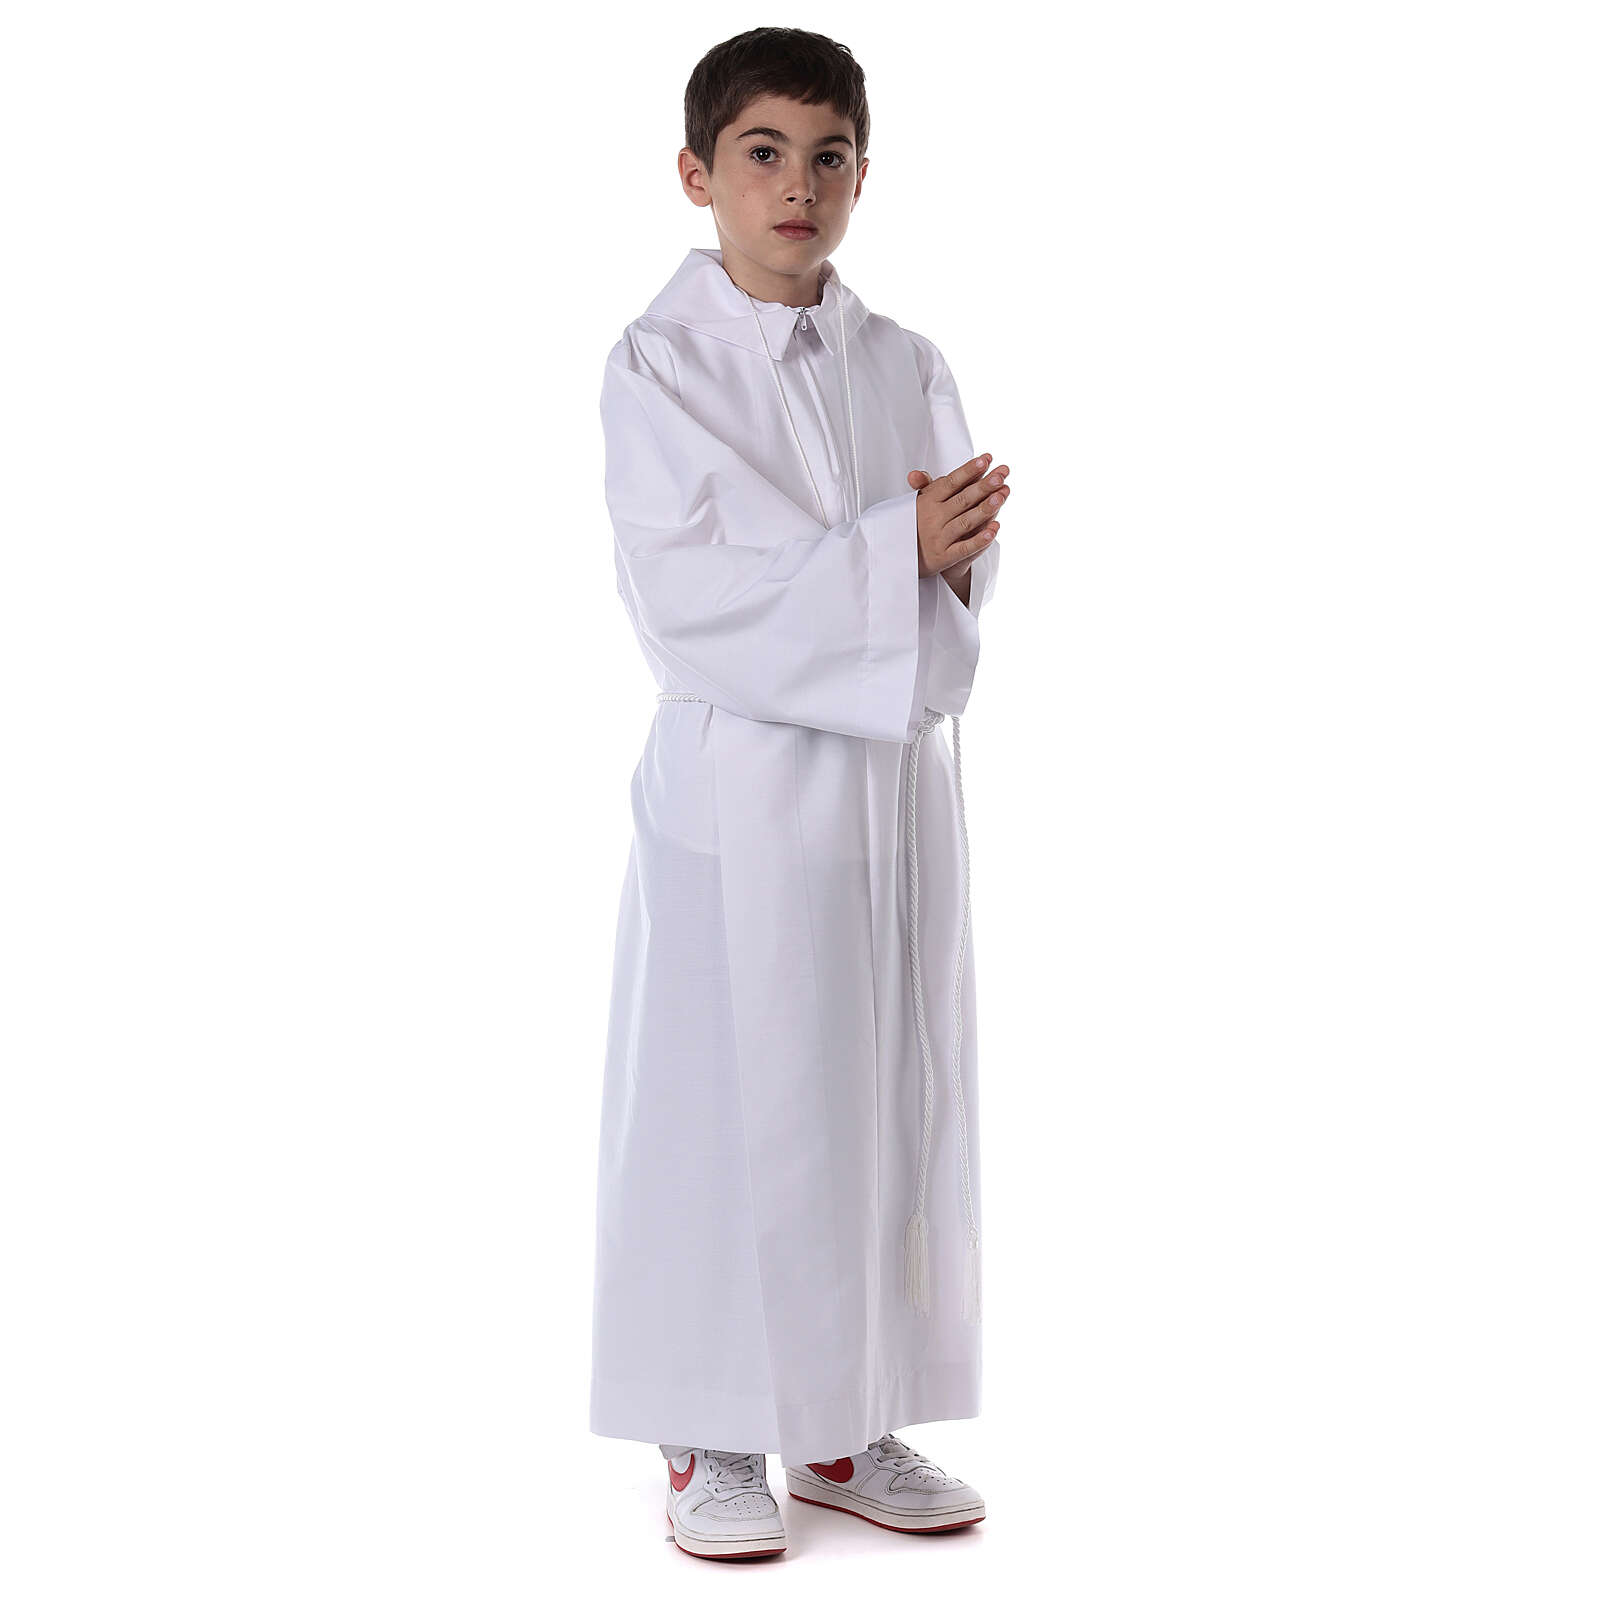 Altar server/Communion alb in white polyester and cotton fabric